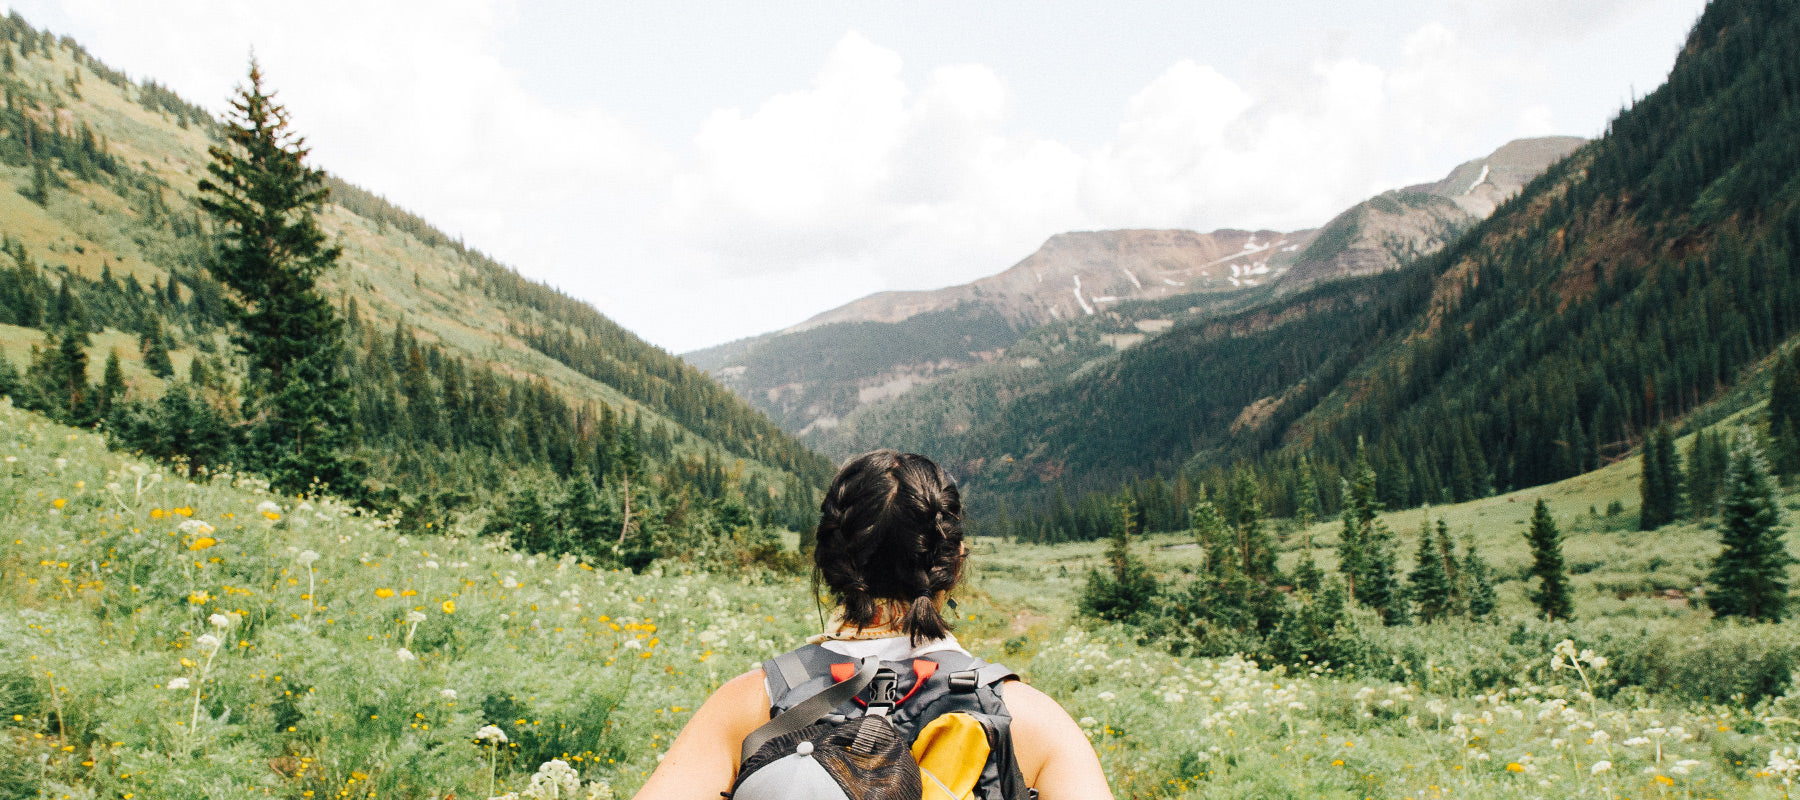 woman with a backpack hiking in the mountains